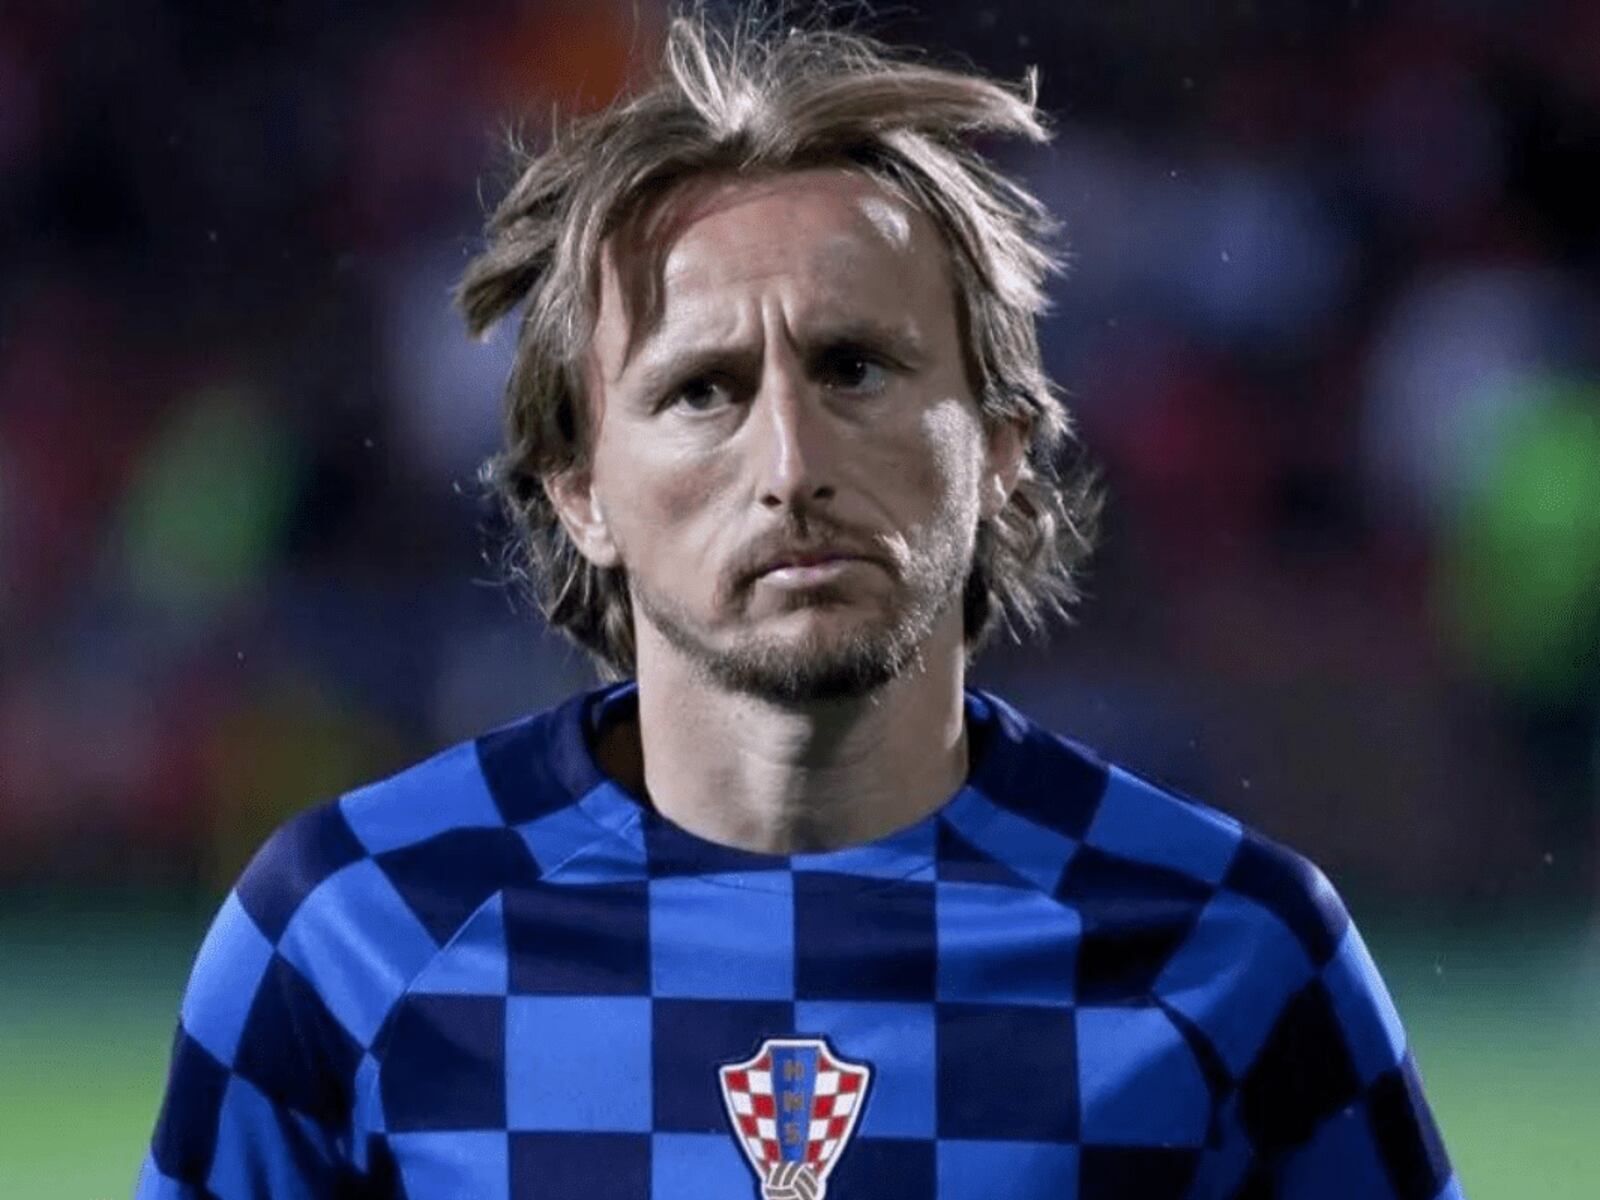 From Croatia, Luka Modric and a message for Carlo Ancelotti and Madrid